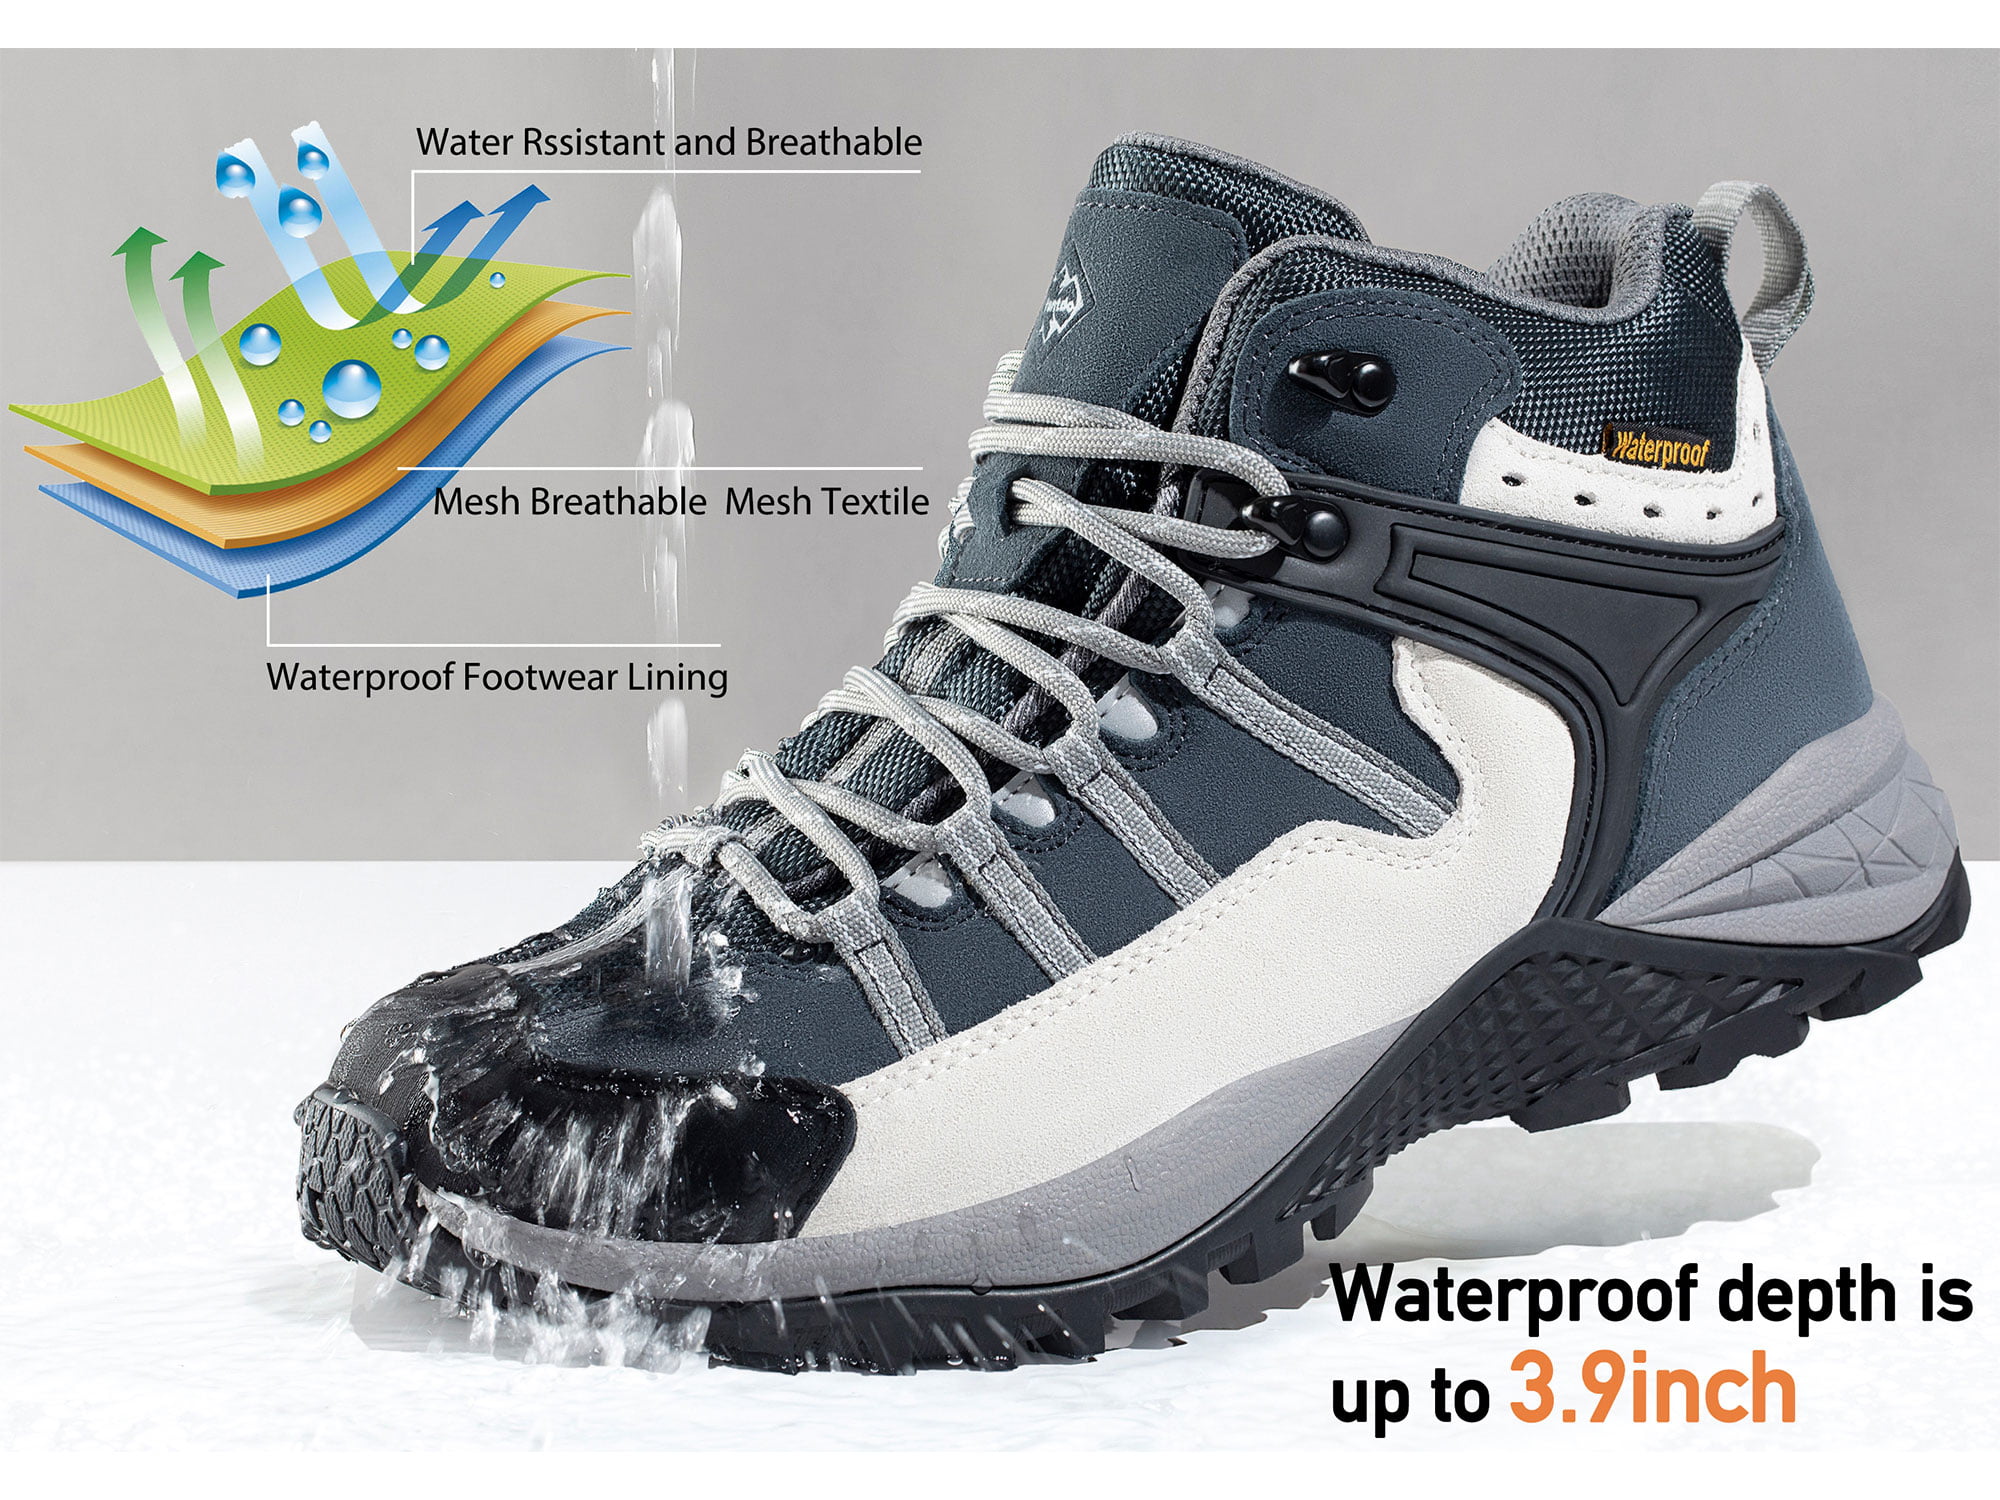 Details about   Wantdo Men's Winter Boots Waterproof Snow Boots Non Slip Insulated Warm Boots 